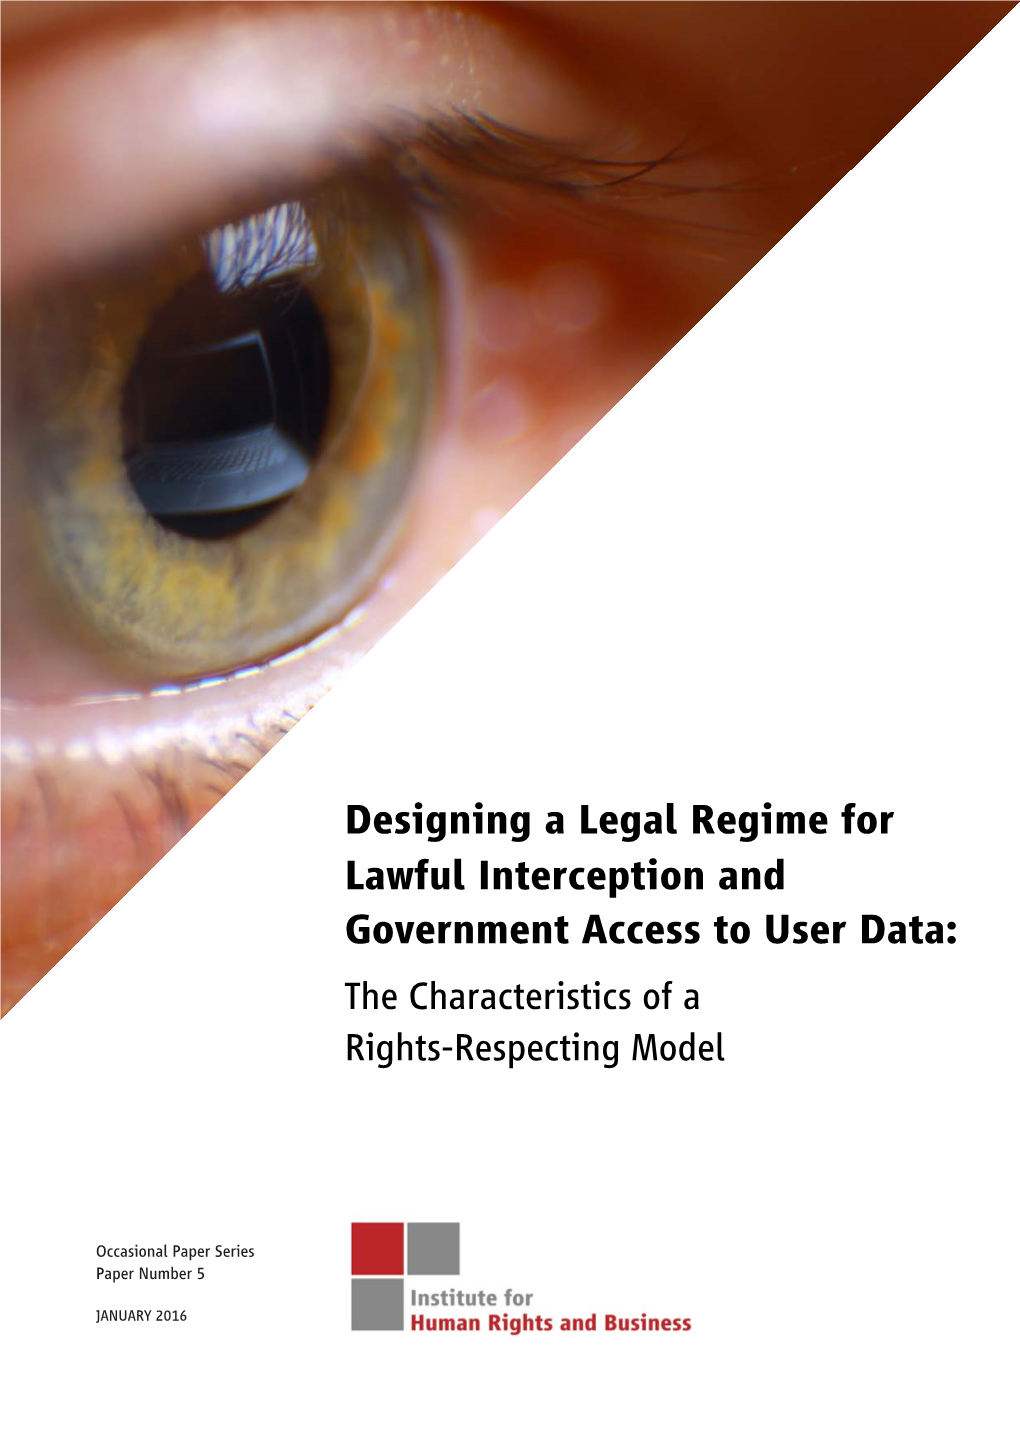 Designing a Legal Regime for Lawful Interception and Government Access to User Data: the Characteristics of a Rights-Respecting Model